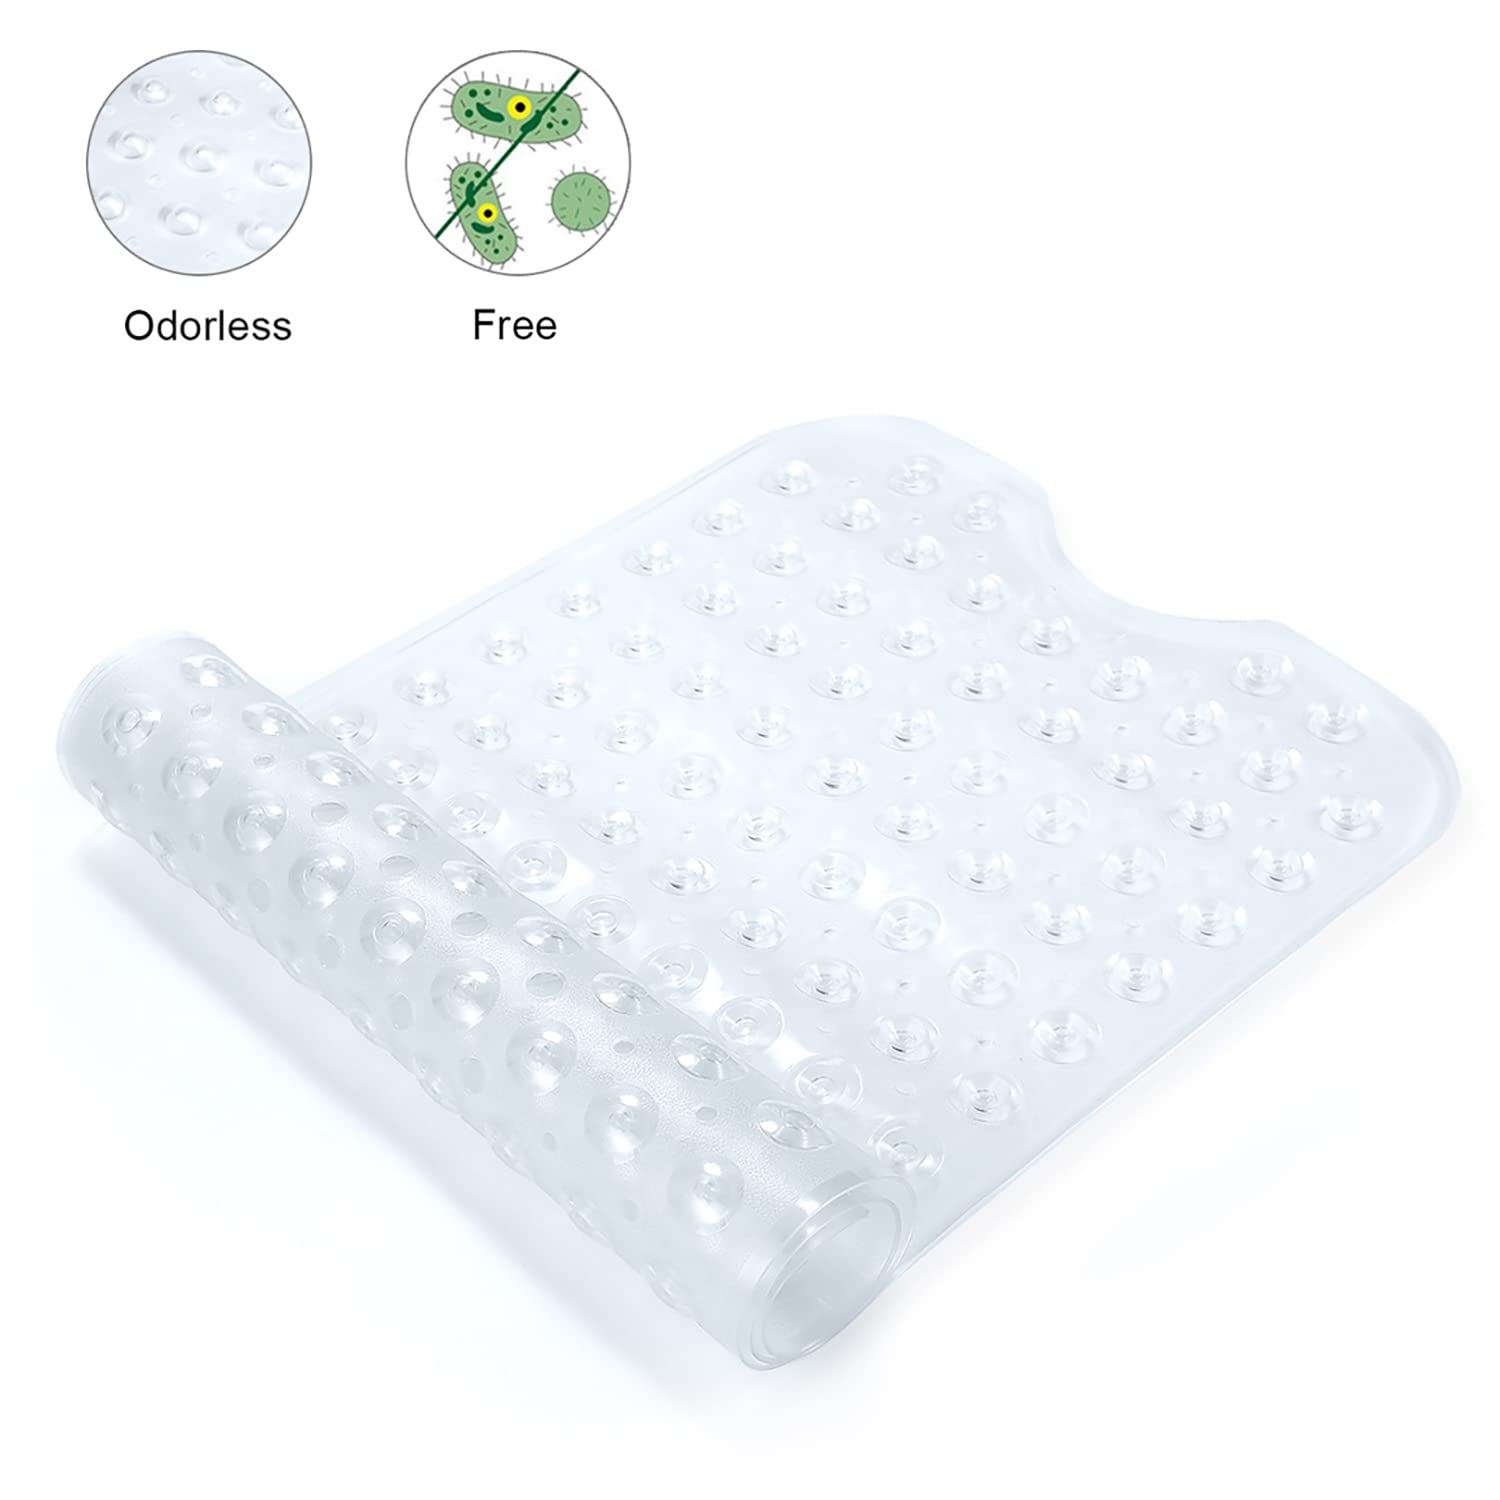 YINENN Bath Tub Shower Safety Mat 40 x 16 Inch Non-Slip and Extra Large, Bathtub Mat with Suction Cups, Machine Washable Bathroom Mats with Drain Holes, Clear